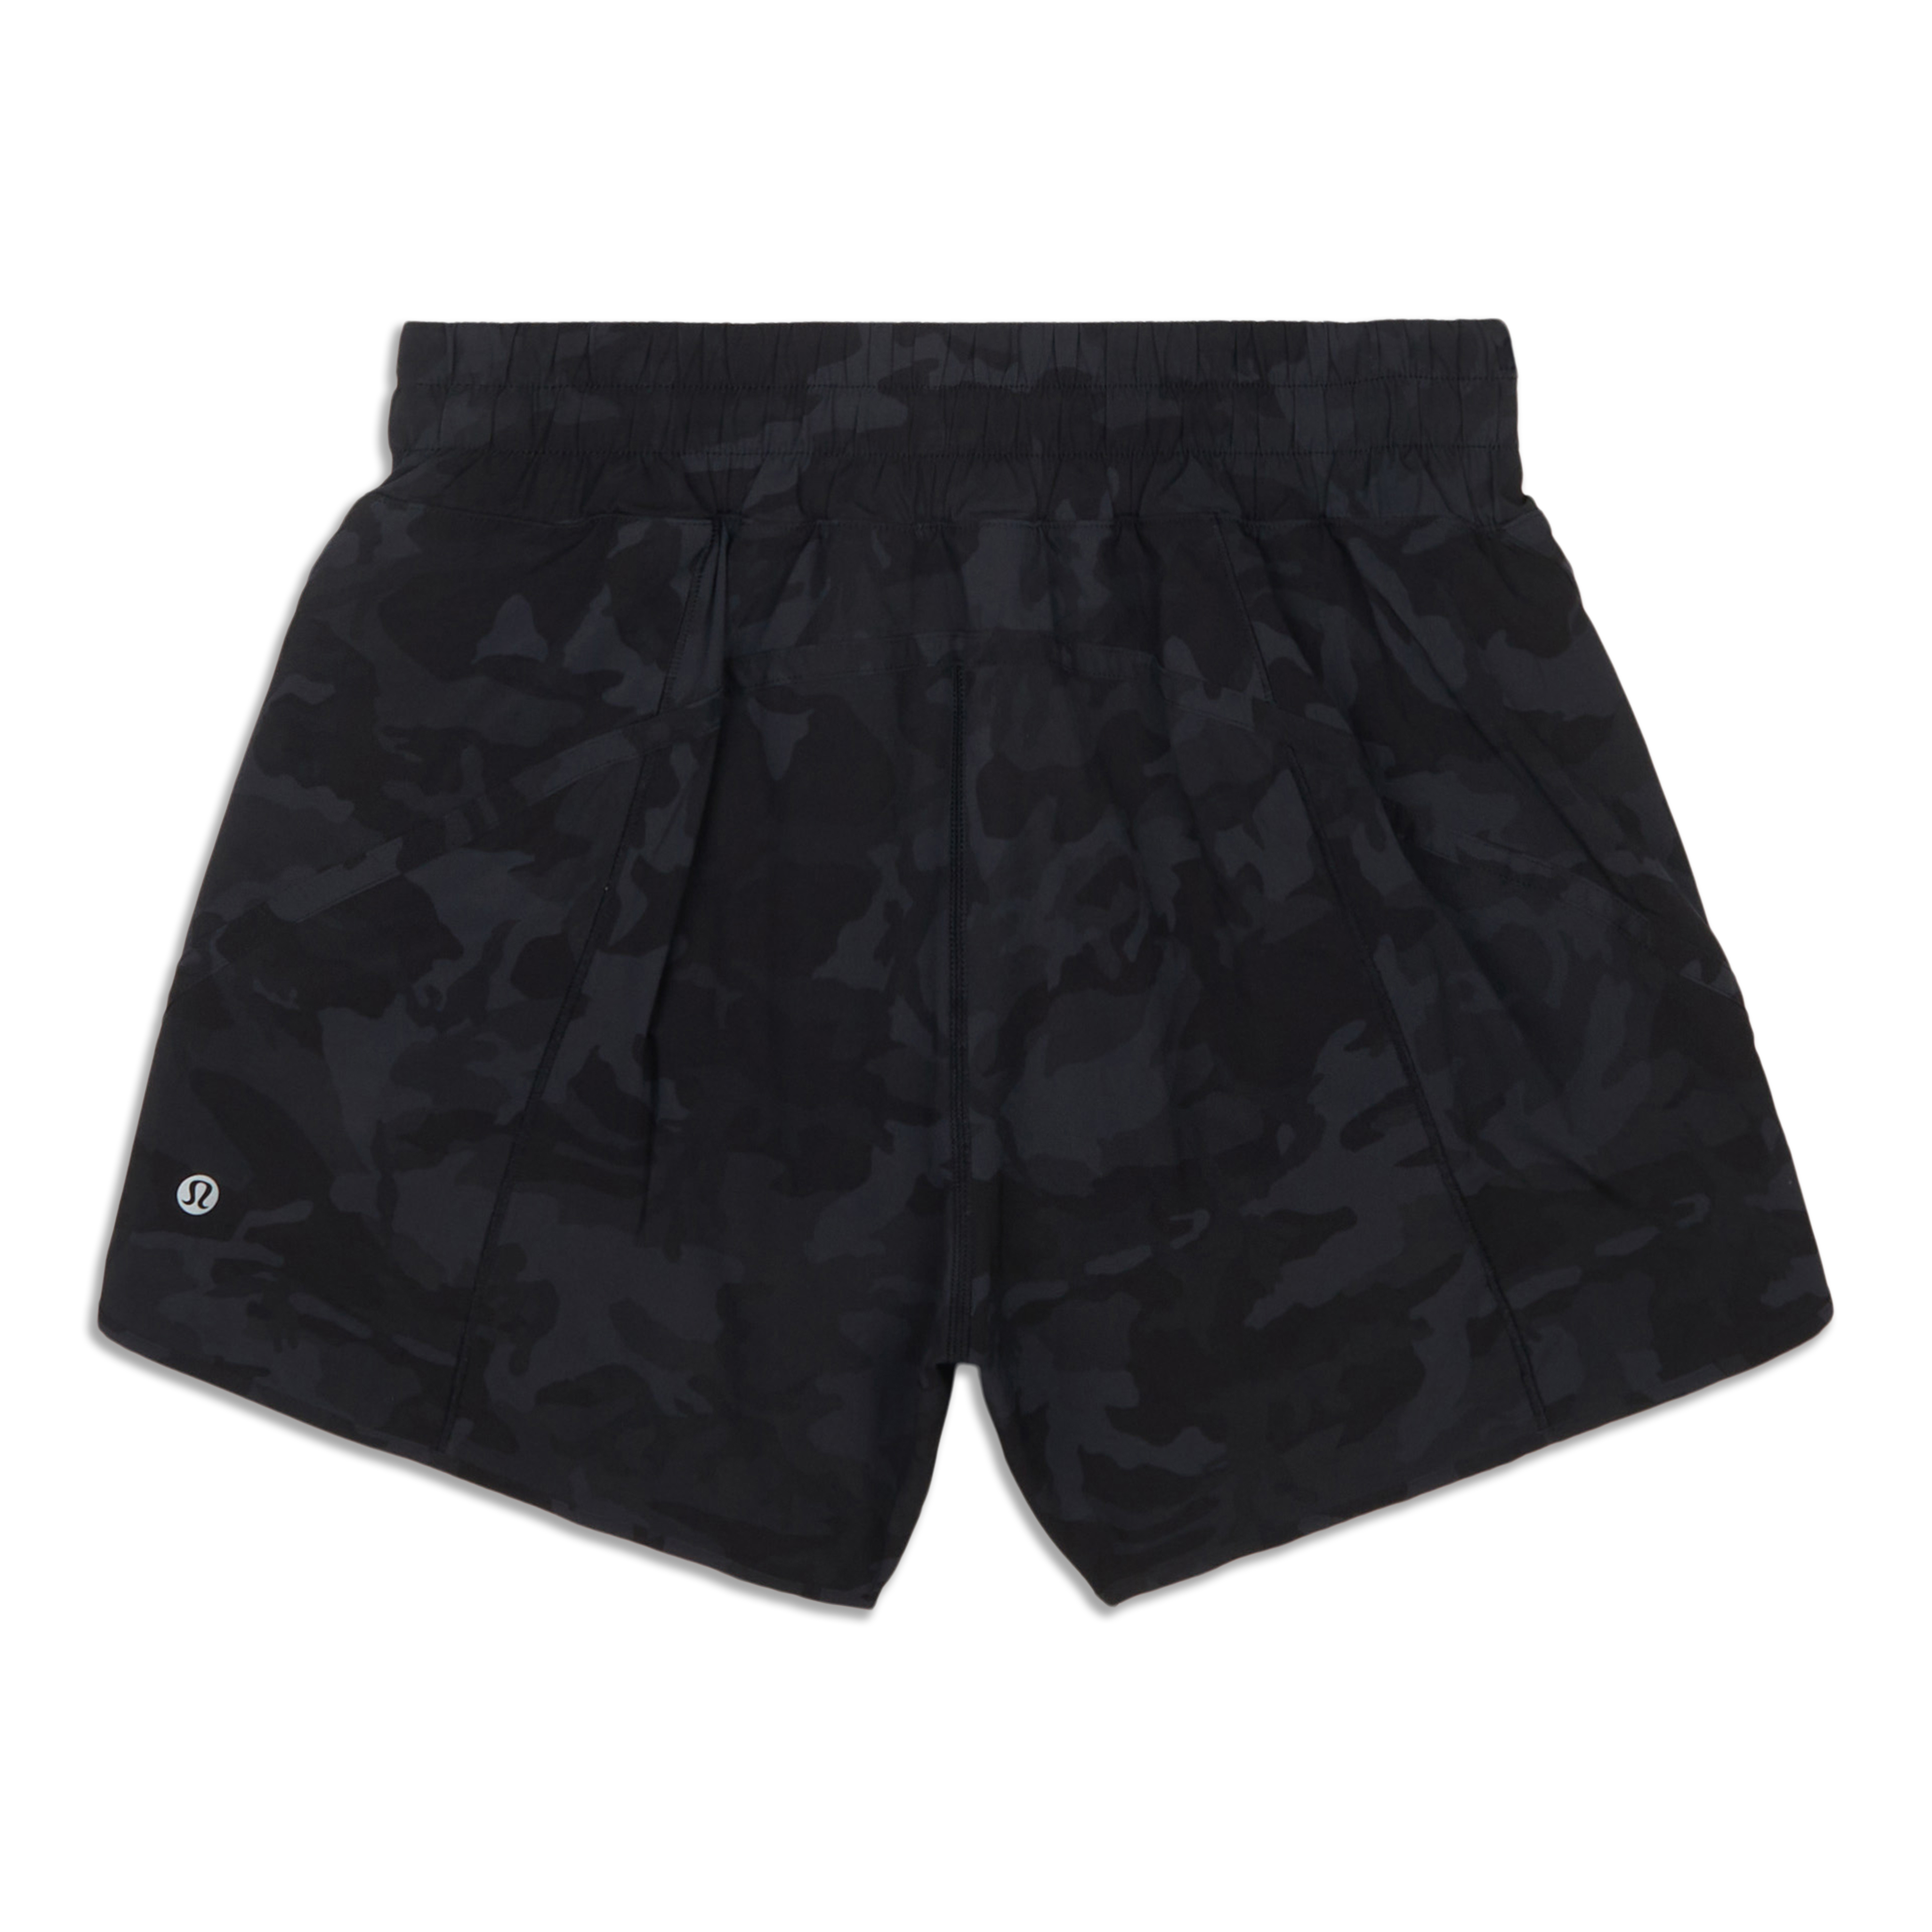 Lululemon On The Fly Short *2.5 In Incognito Camo Multi Grey